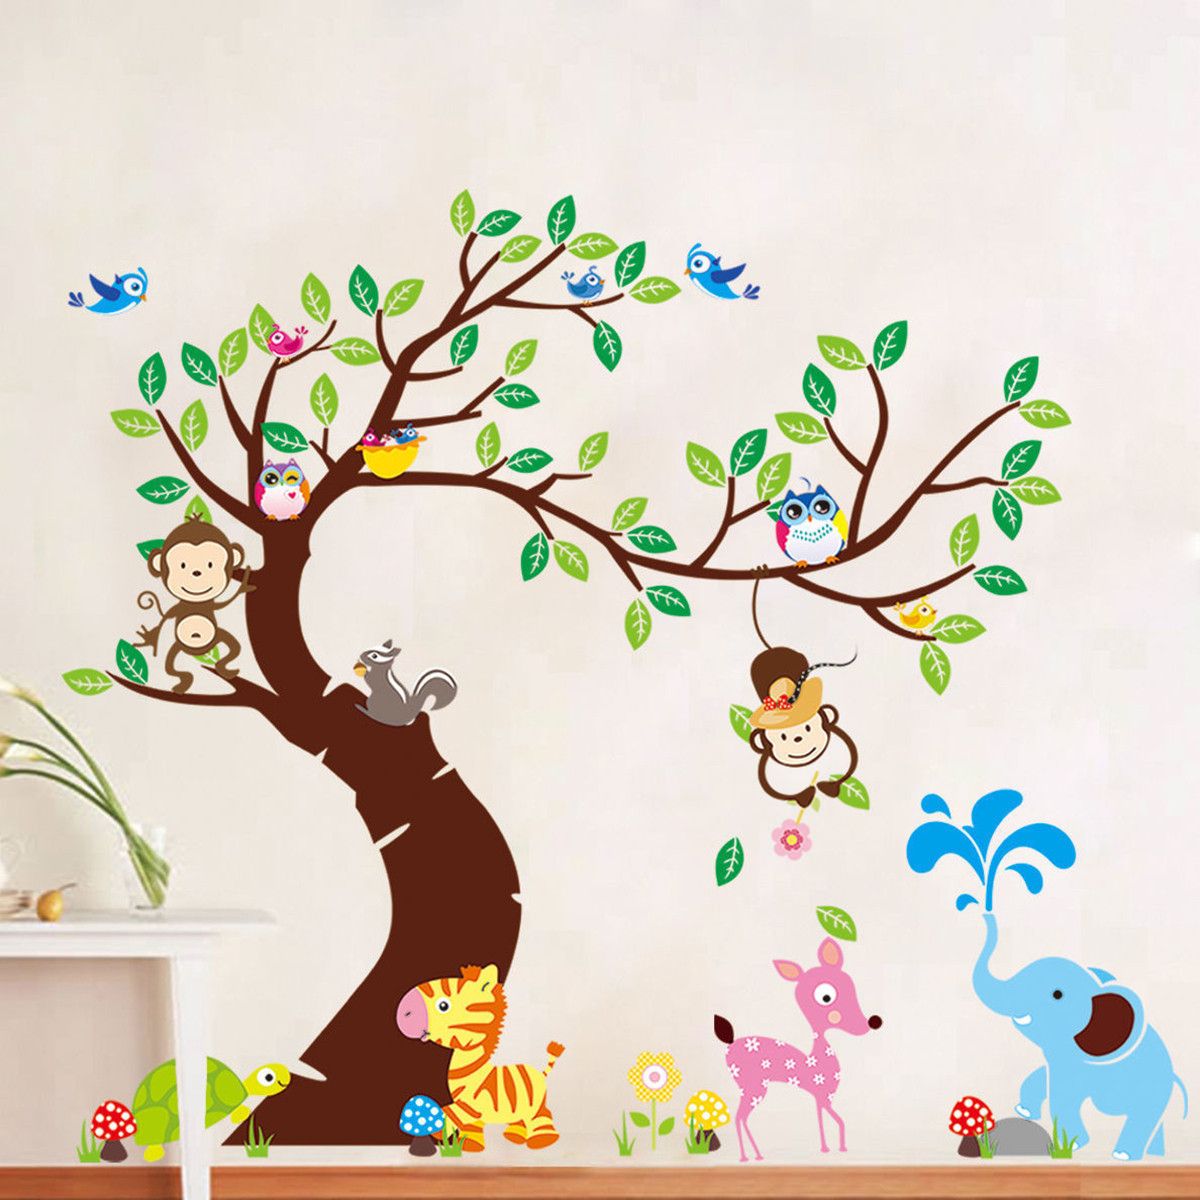 Removable-Jungle-Animals-Wall-Sticker-Monkey-Owl-Tree-Decal-Nursery-Room-Decorations-1458519